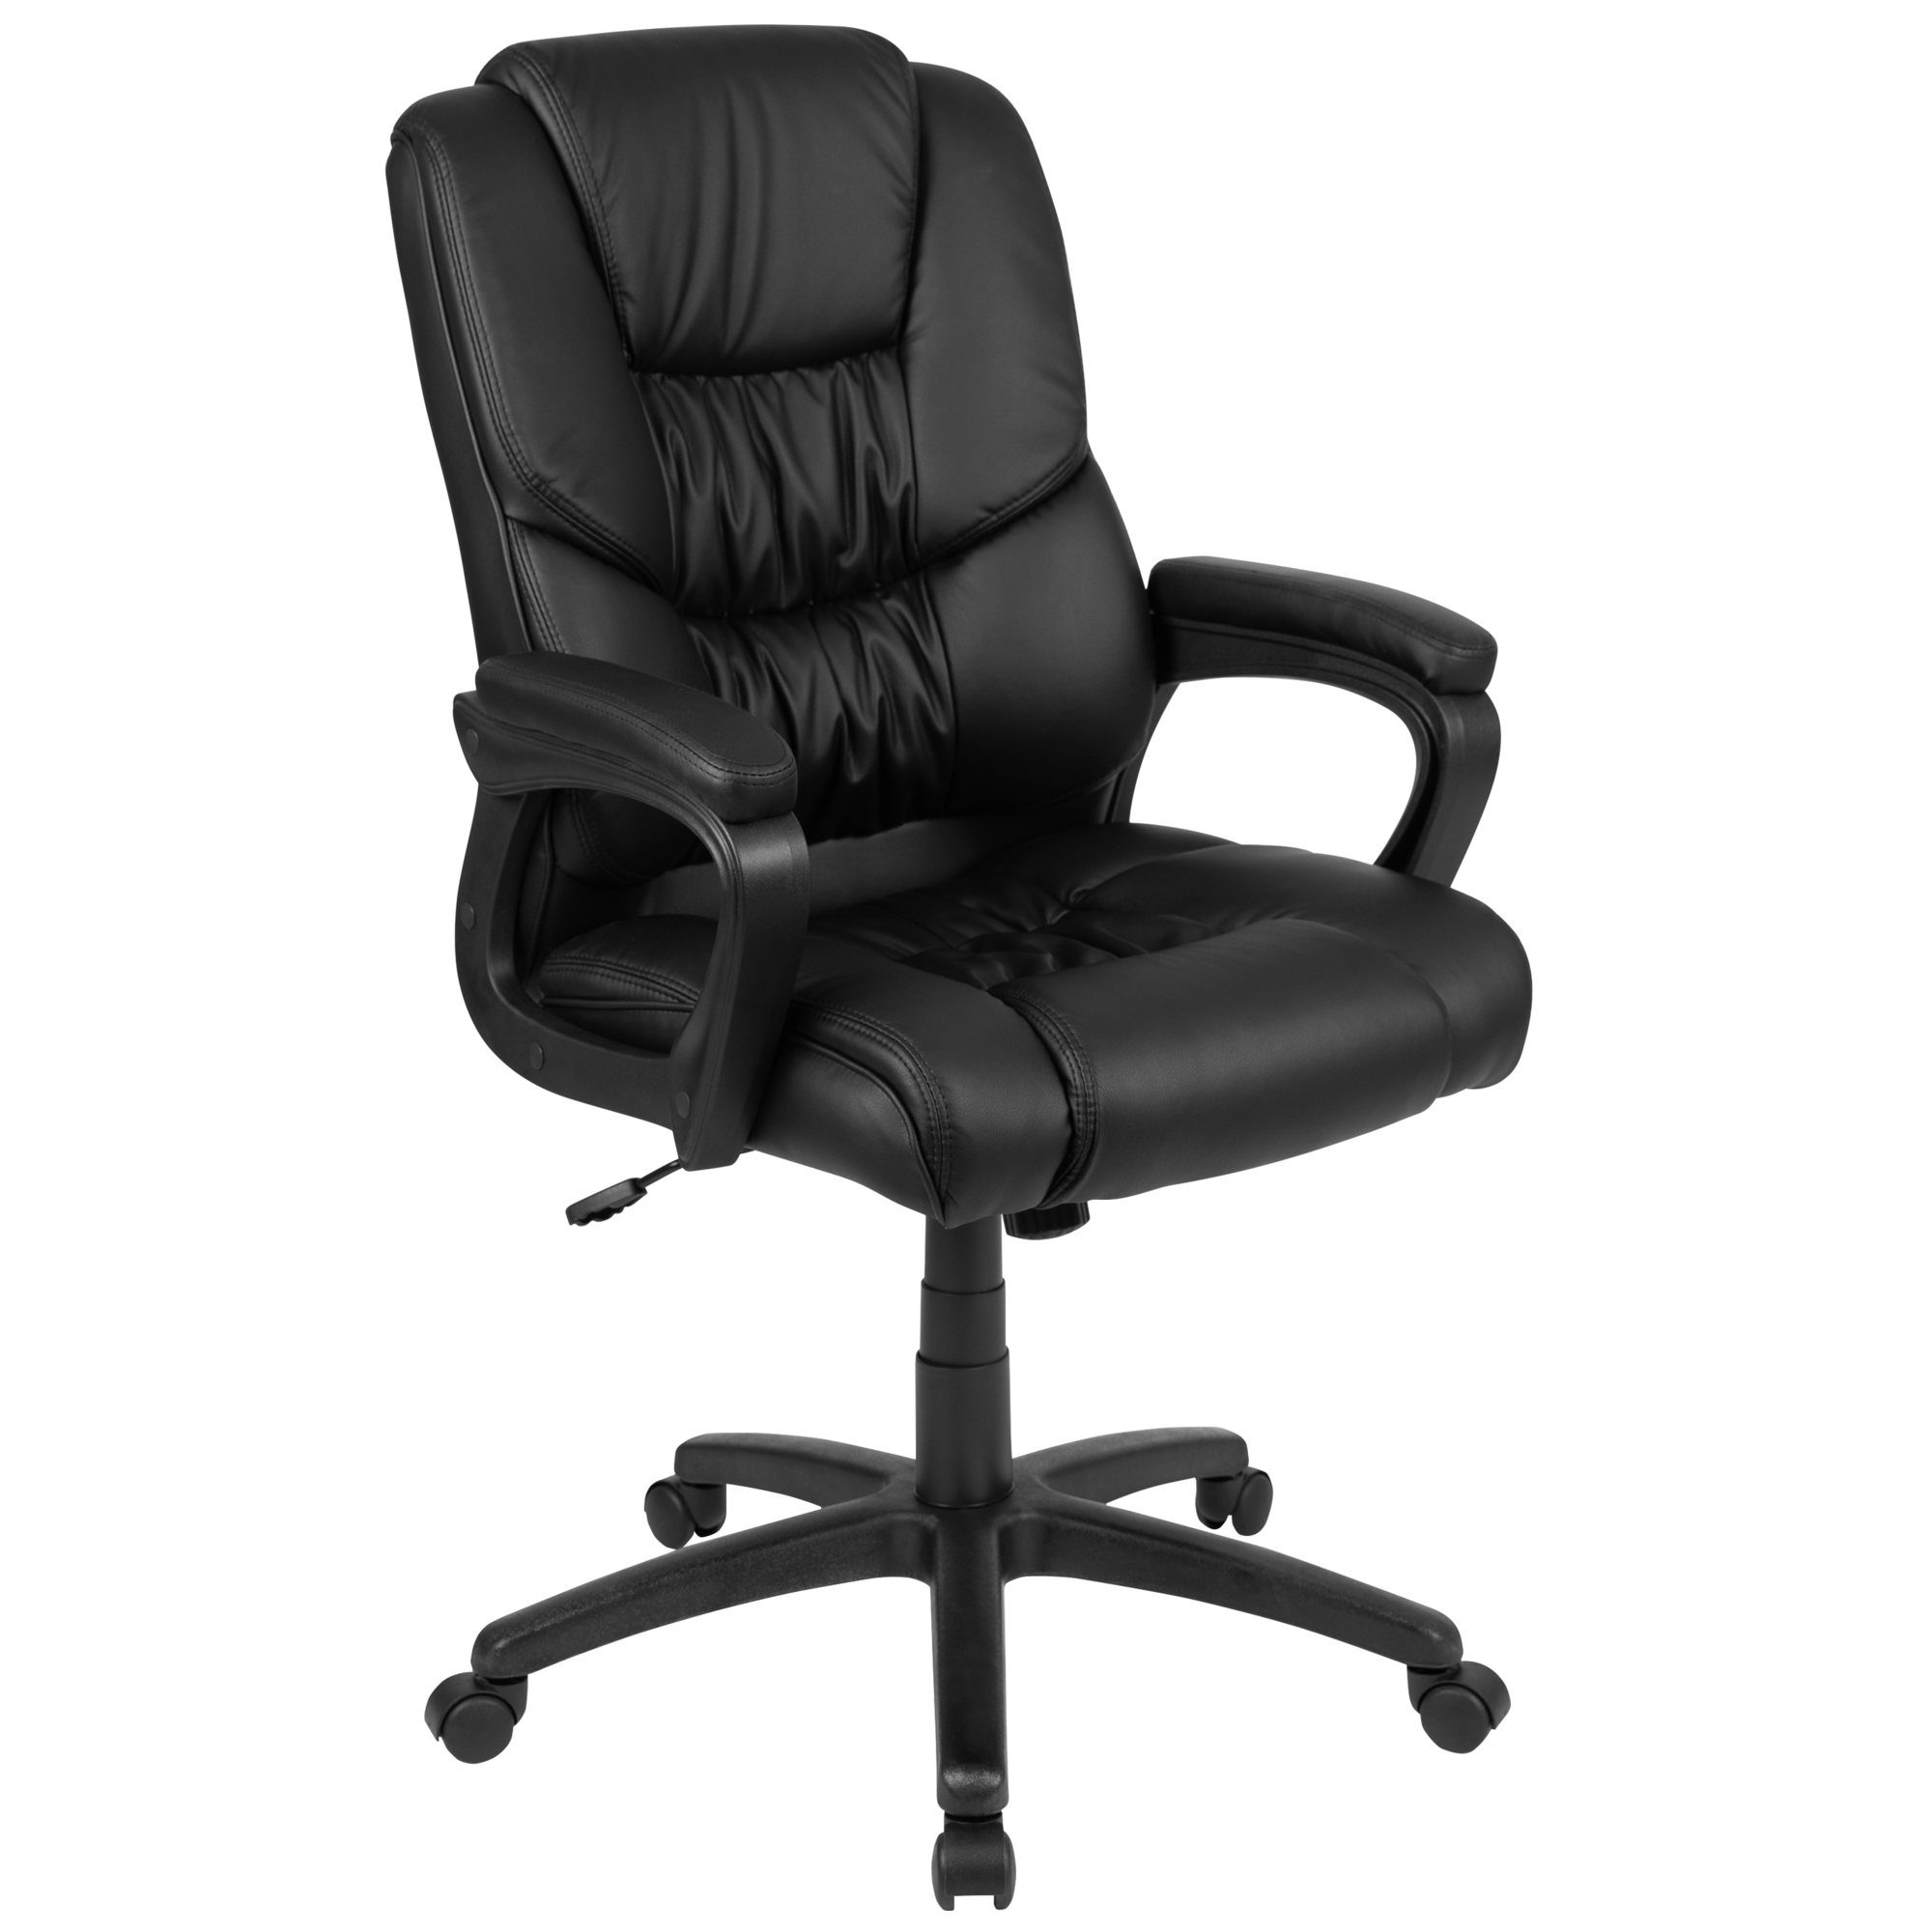 Flash Furniture, 400 lb. Big Tall Black LeatherSoft Office Chair, Primary Color Black, Included (qty.) 1, Model CX1179HBK